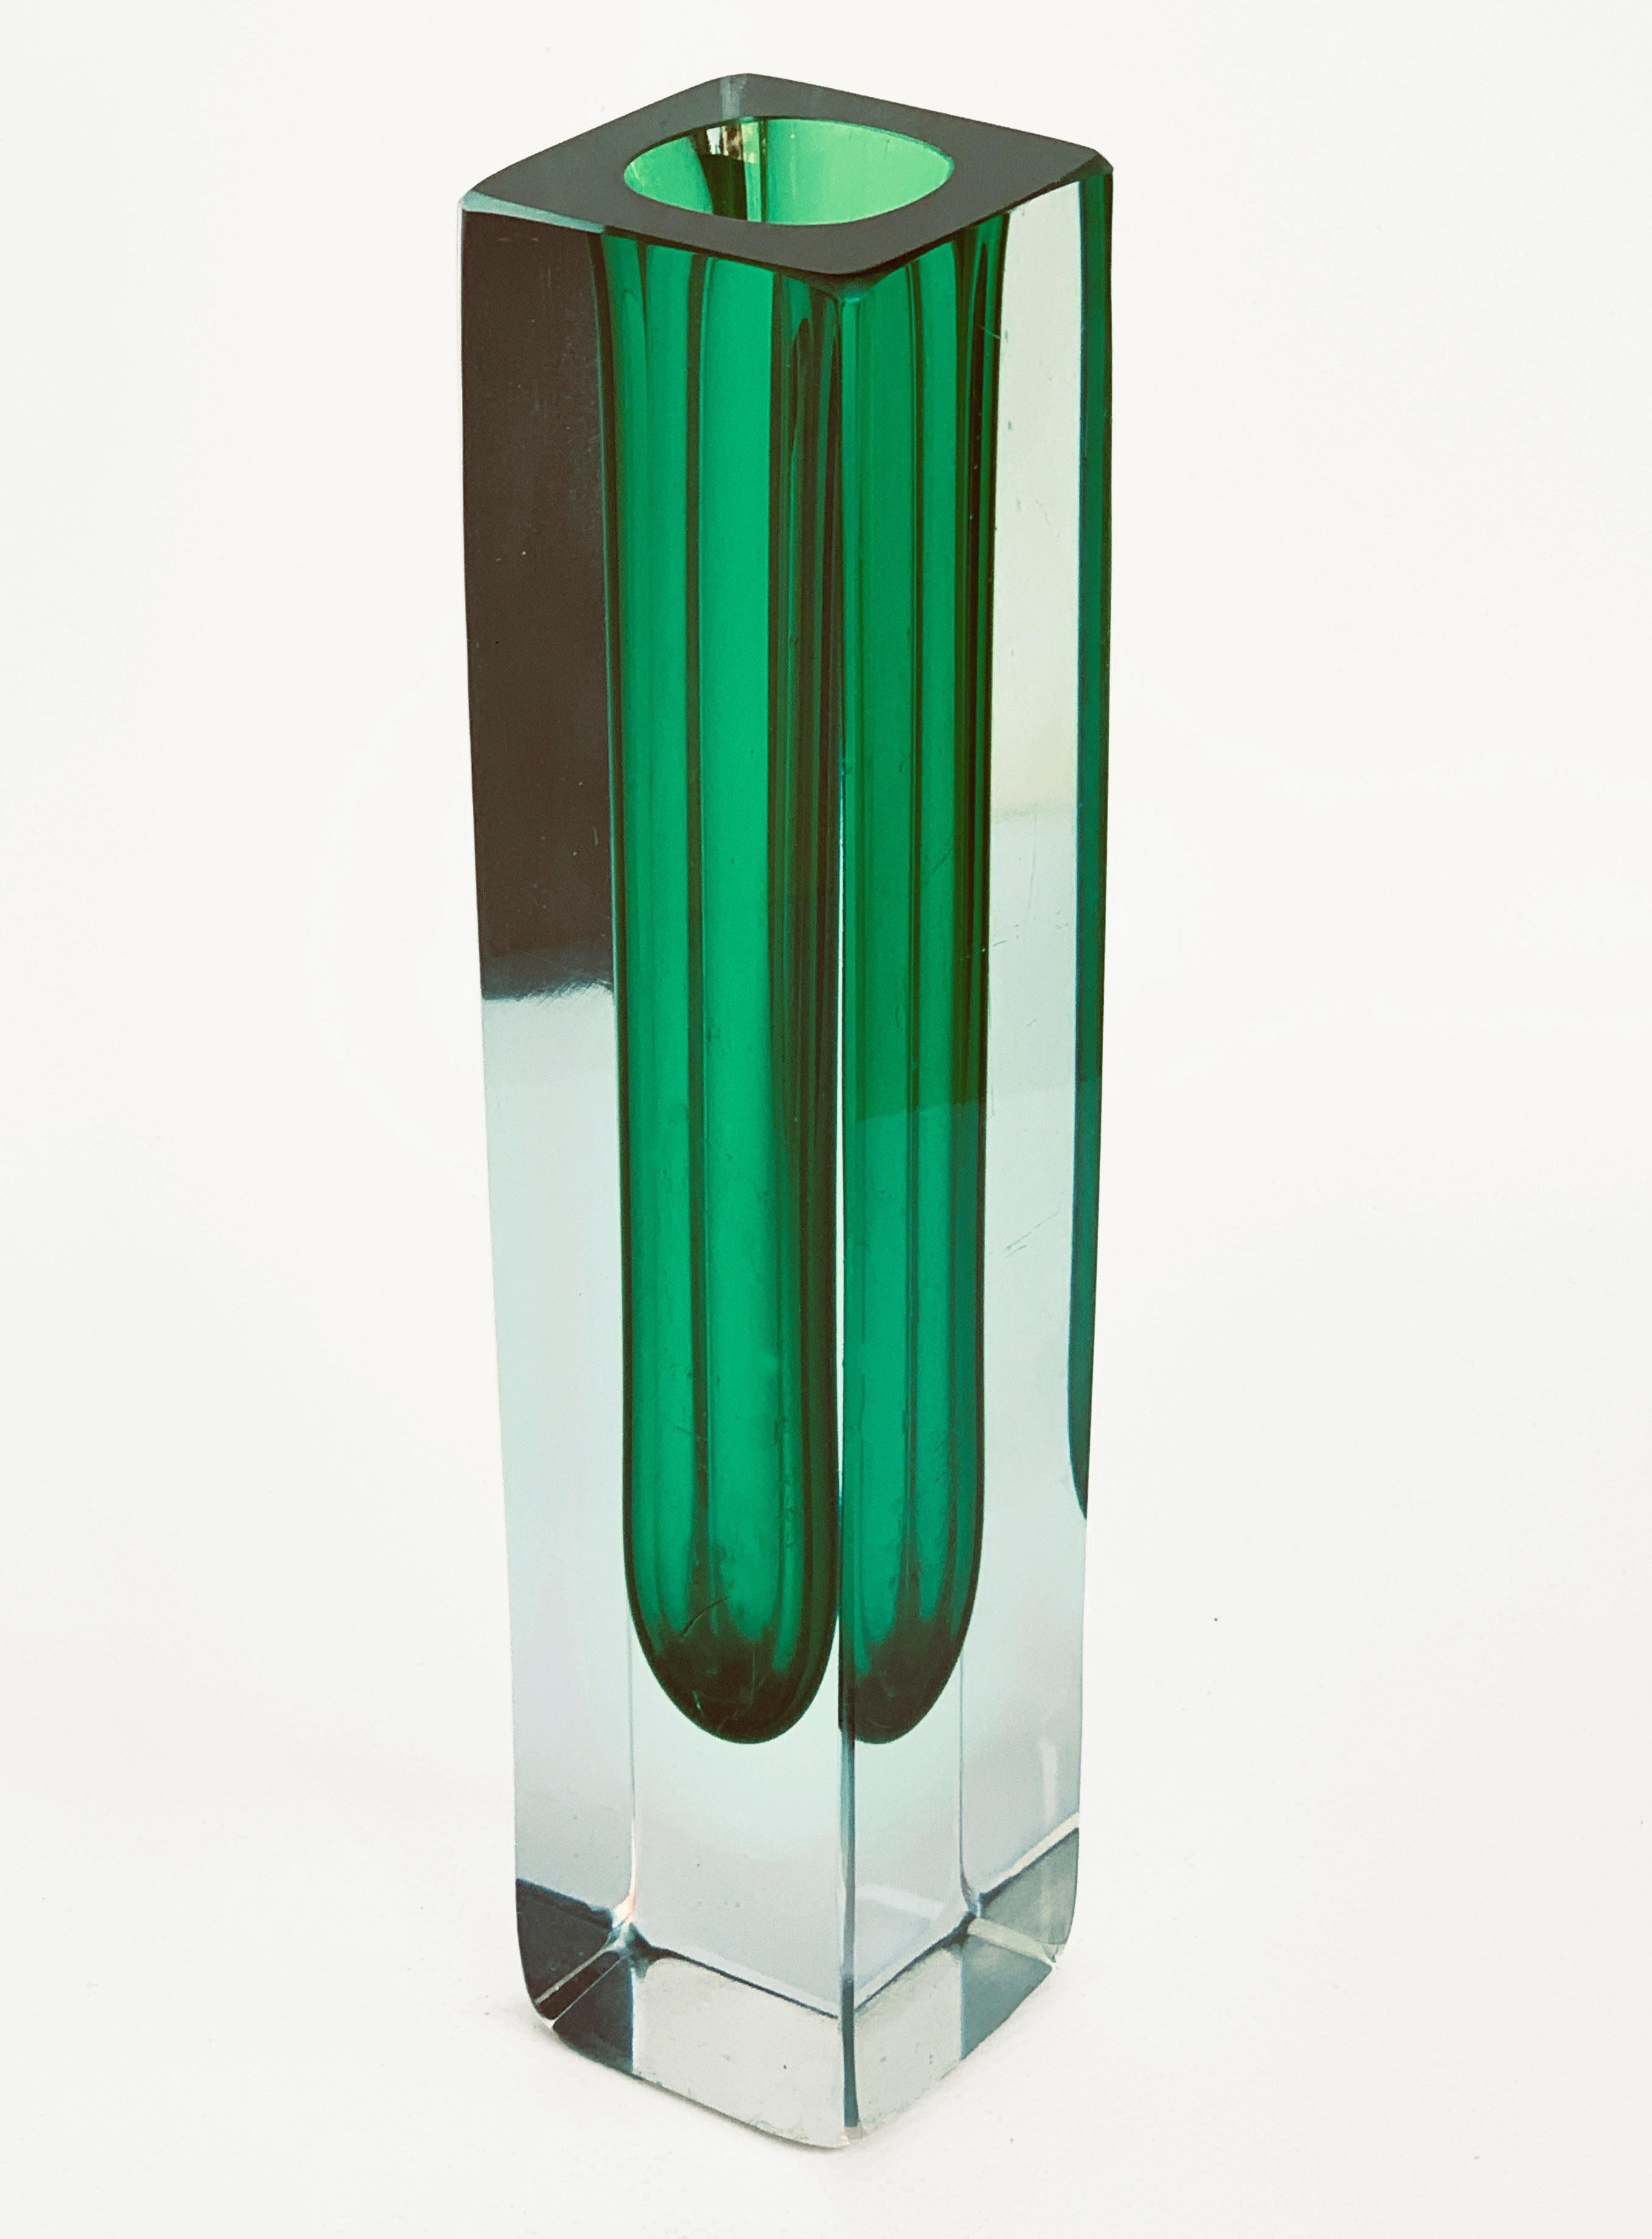 Large faceted glass vase by Flavio Poli for Seguso.
This beautiful piece is very elegant thanks to the delicate line and the green and transparent color. It is rare, not only for its shape but also for its size.

Perfect condition, without